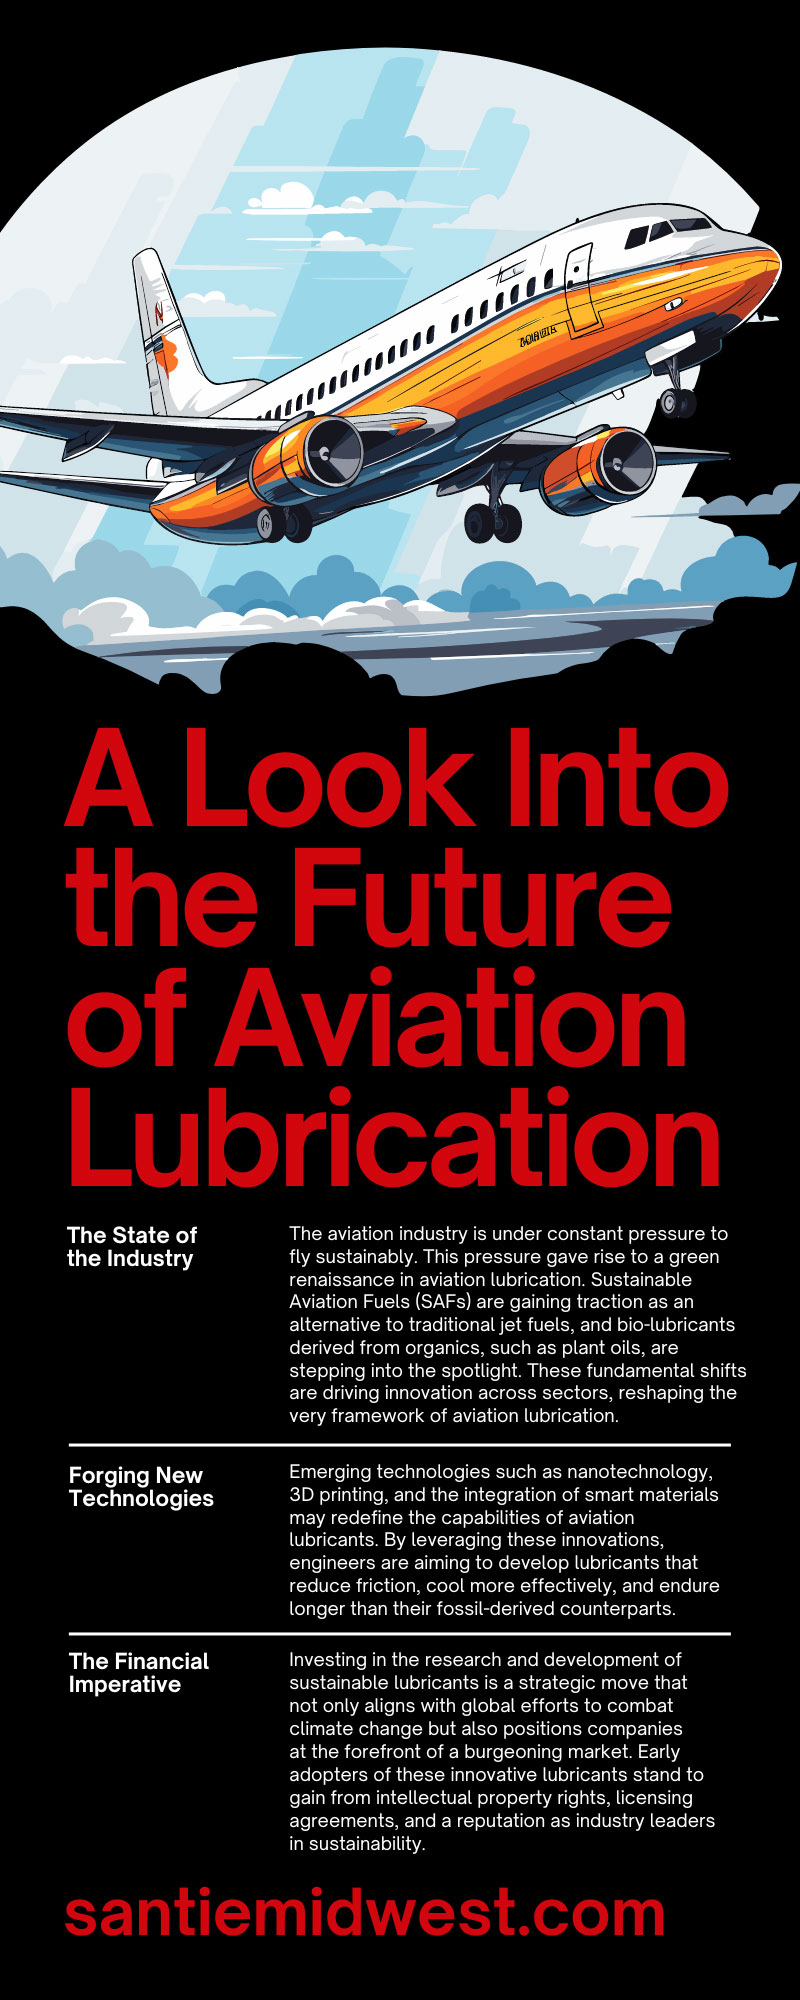 A Look Into the Future of Aviation Lubrication